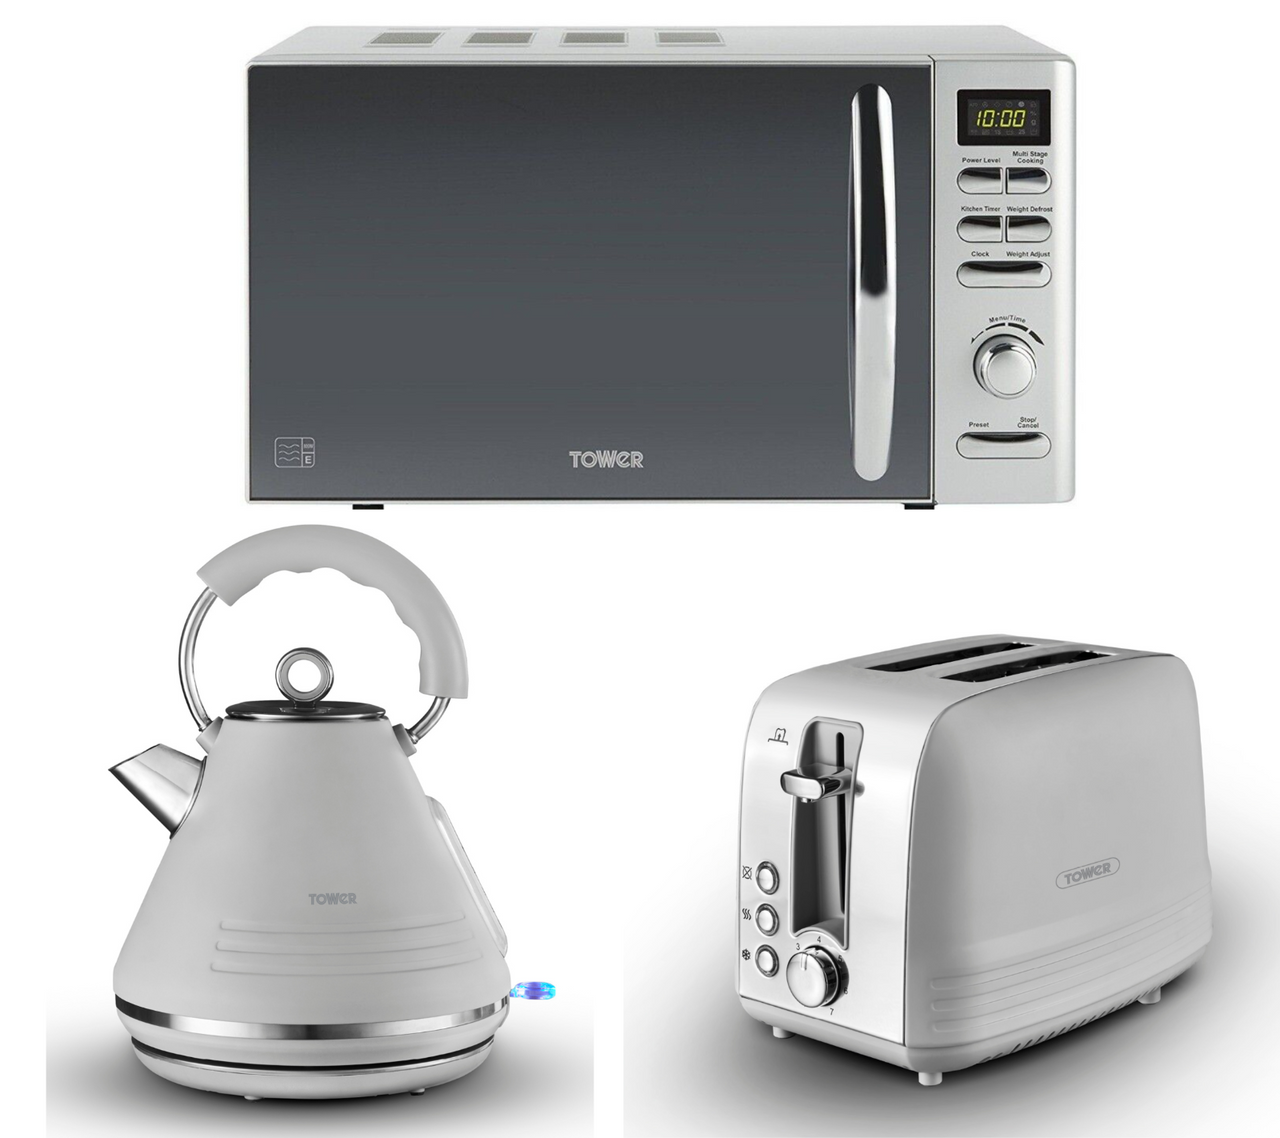 Tower Ash Grey Pyramid Kettle, 2 Slice Toaster & Tower T24019S Silver Microwave